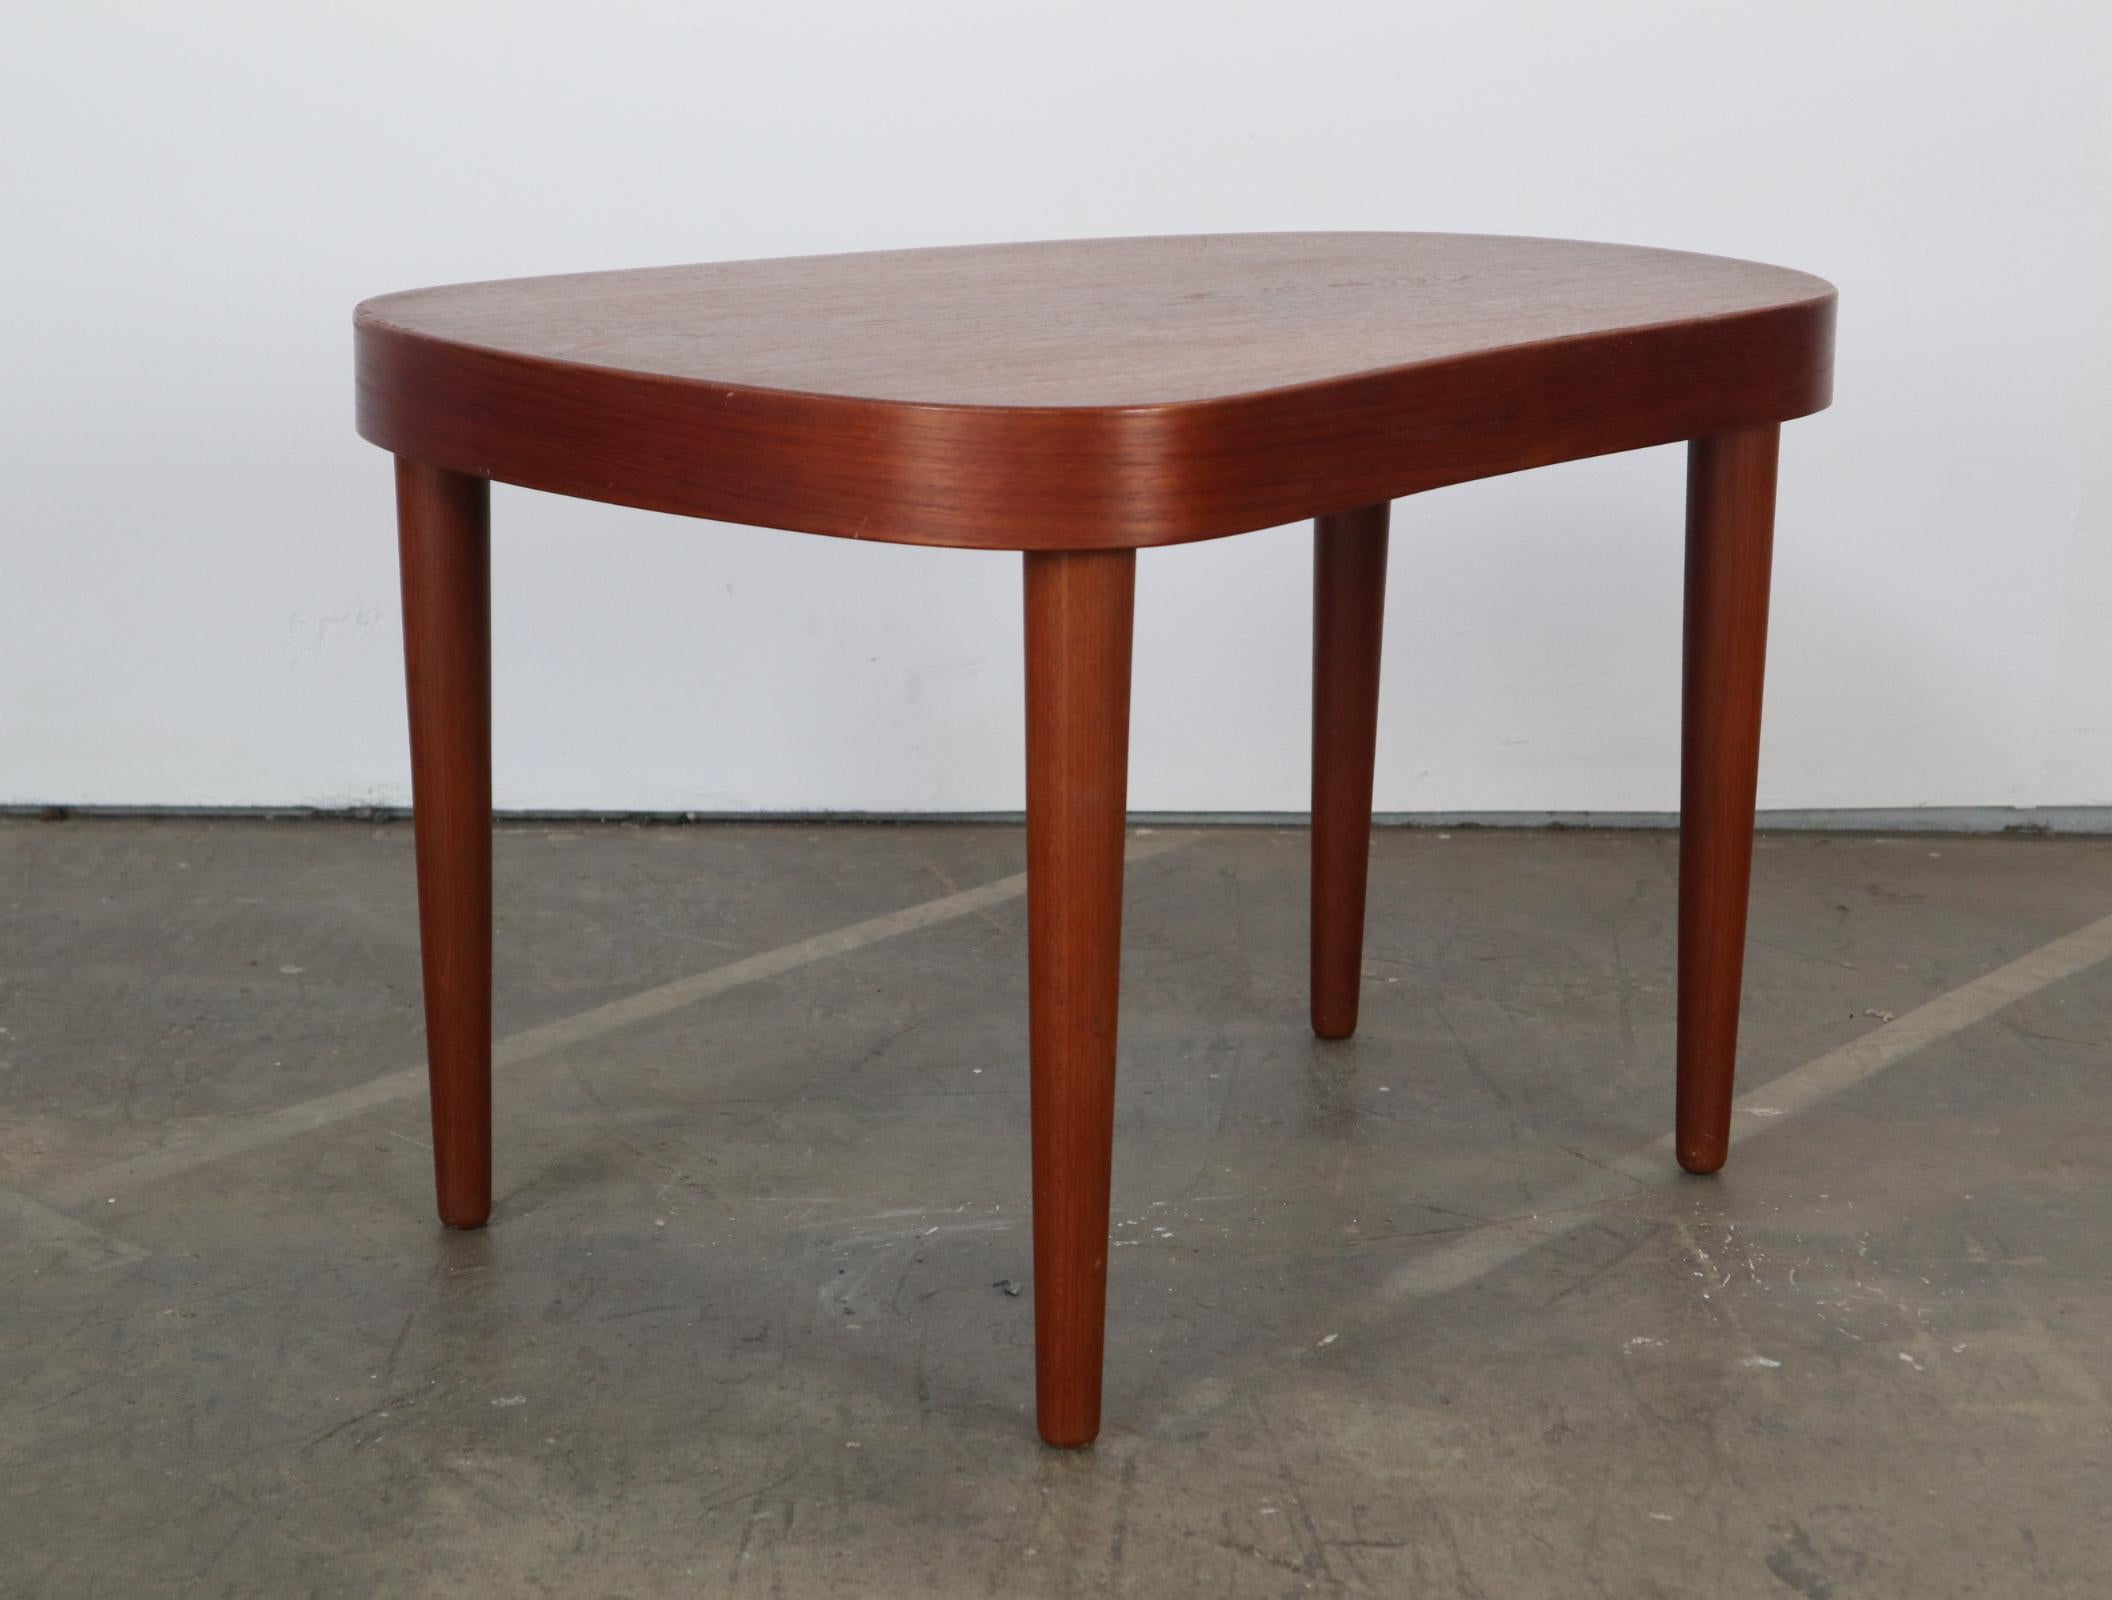 Lovely Danish biomorphic kidney shaped side table by Poul Dinesen. Gorgeous deep teak dolor and grain. Perfect beside a sofa or bed. Can accommodate a large lamp or planter.